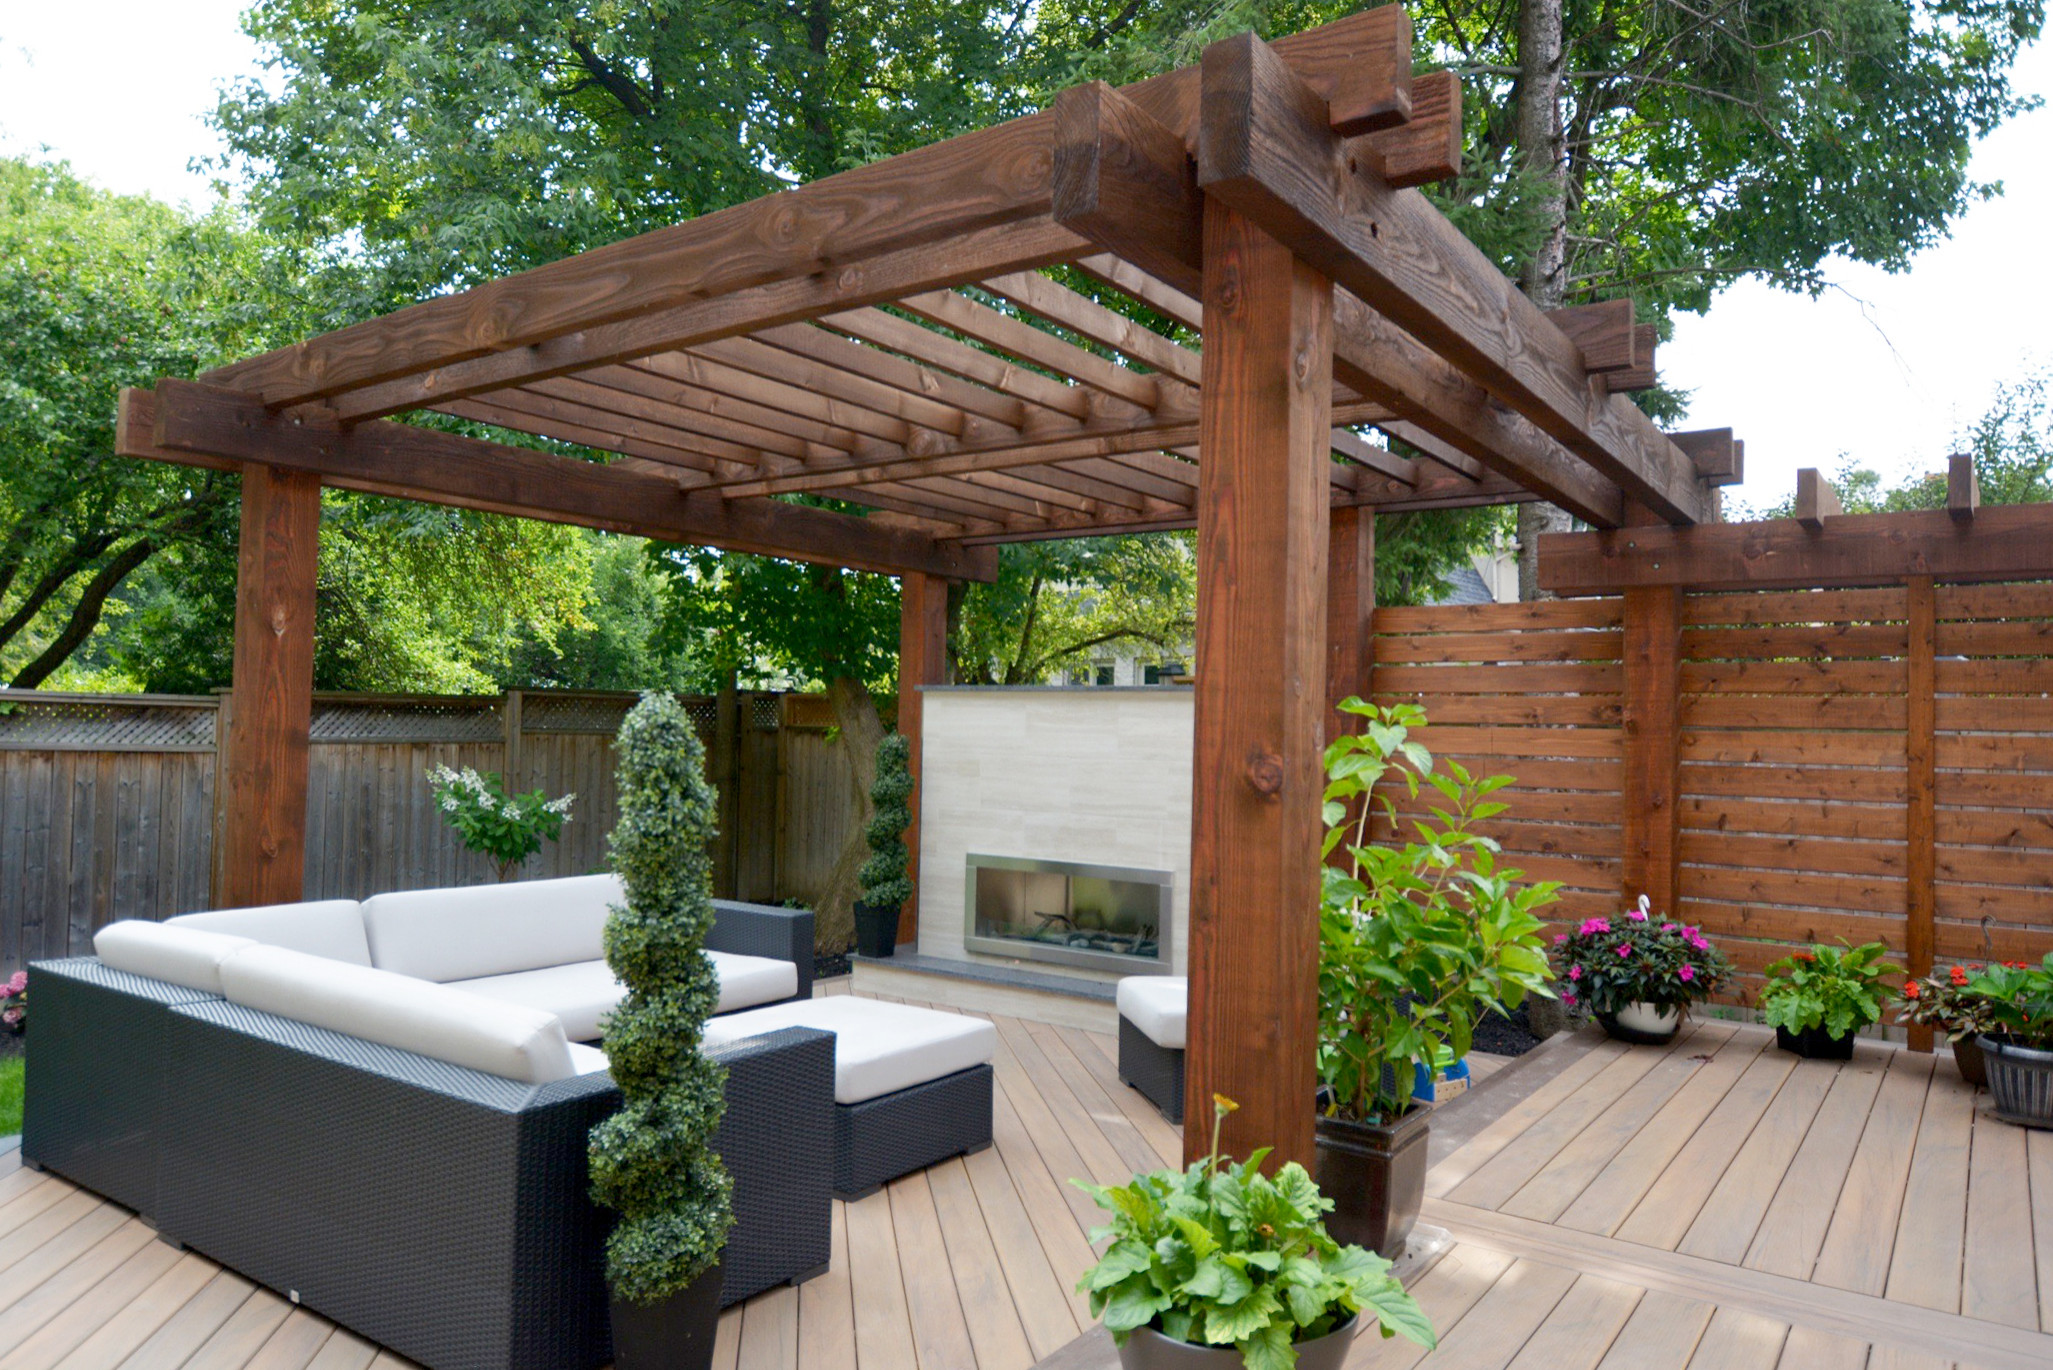 75 Beautiful Modern Pergola Pictures Ideas Houzz,Tanqueray Gin And Tonic Recipe